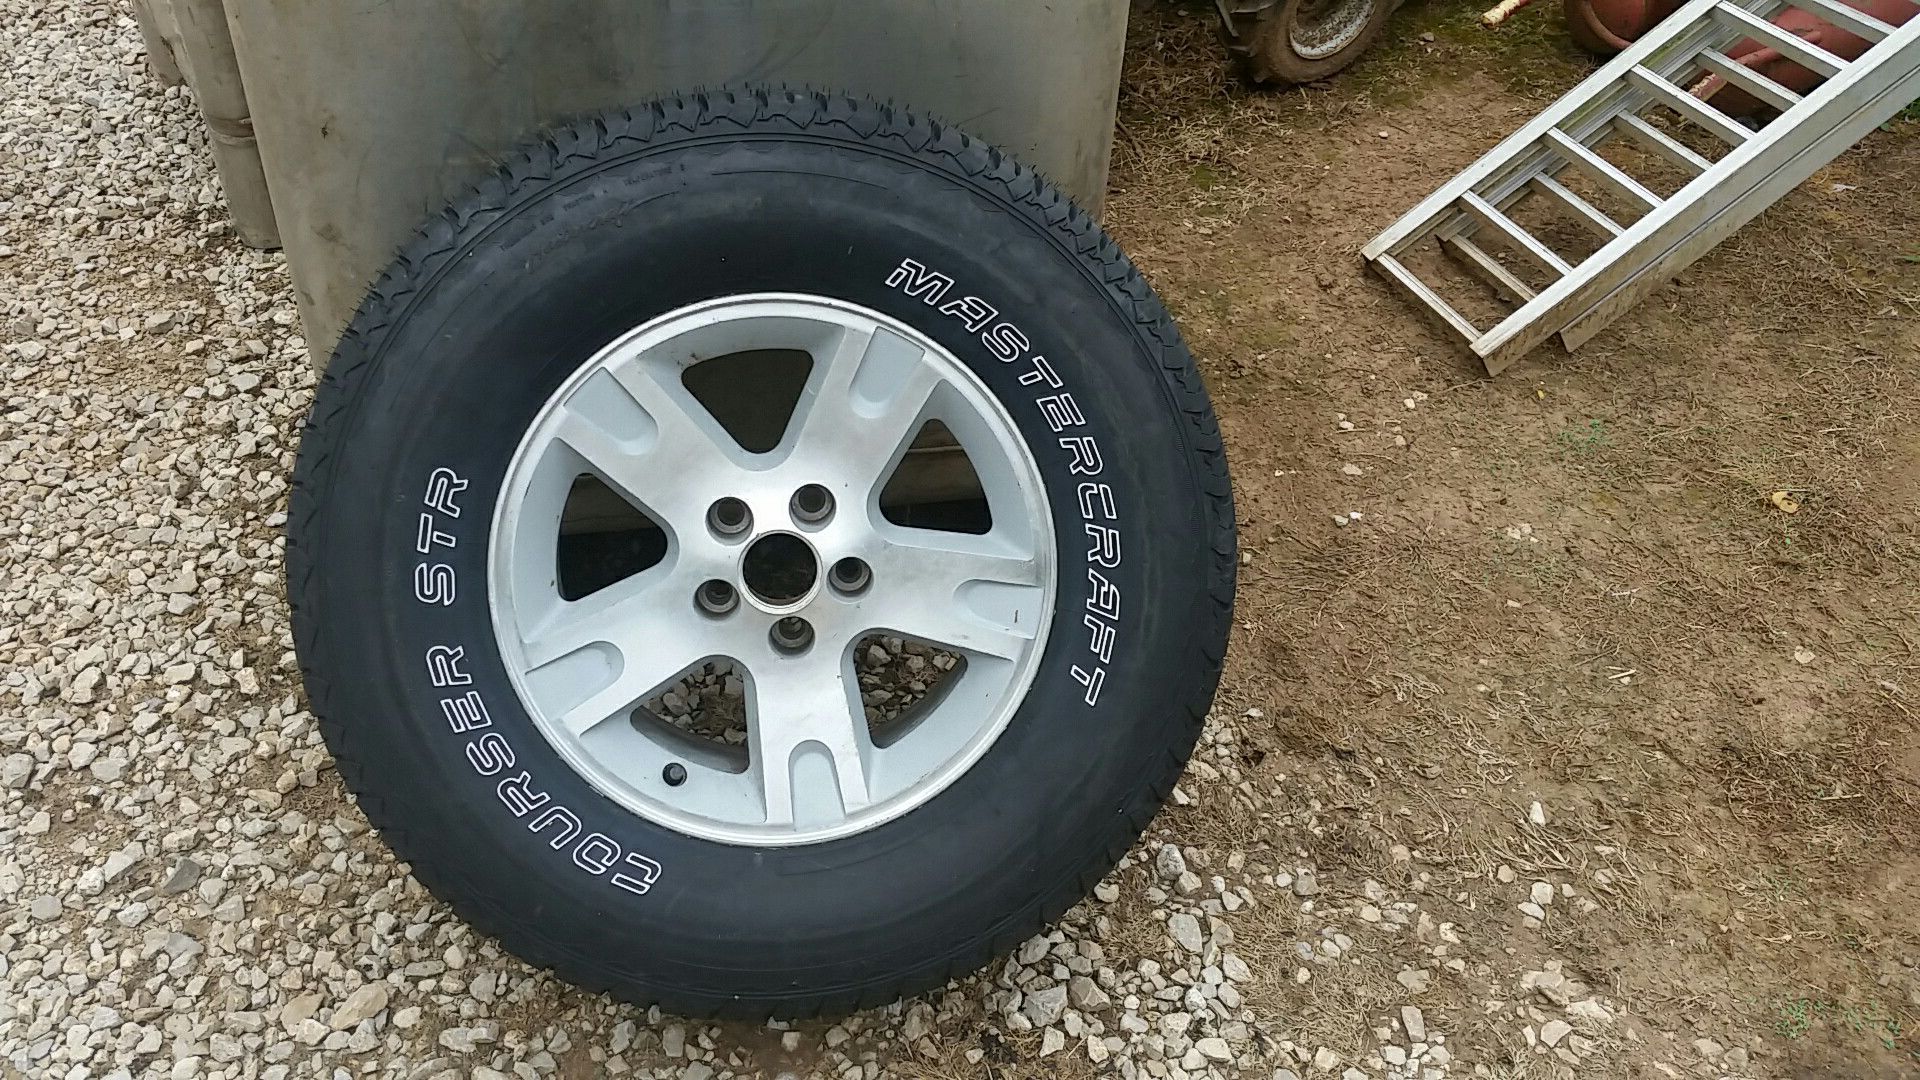 Photo Master craft CourserSTR and aluminum wheel 25570R16 new tire never used. I had it for a spare for my 2003 ford ranger